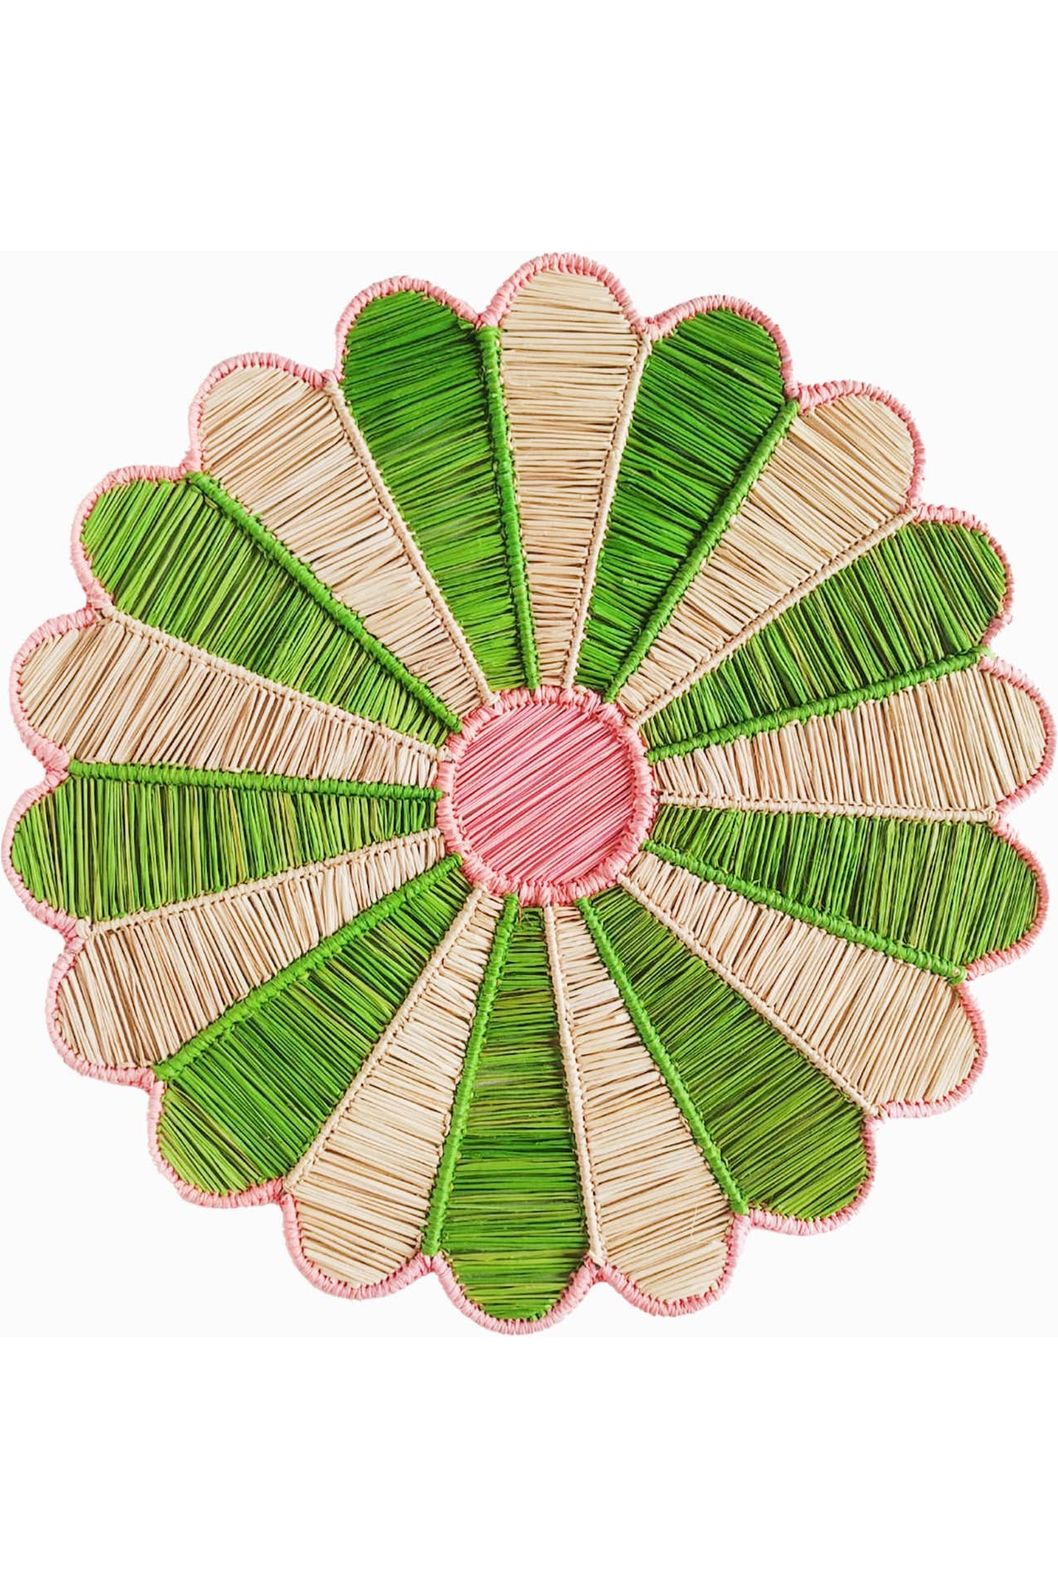 Irca Palm Placemats-Pink and Green s/4